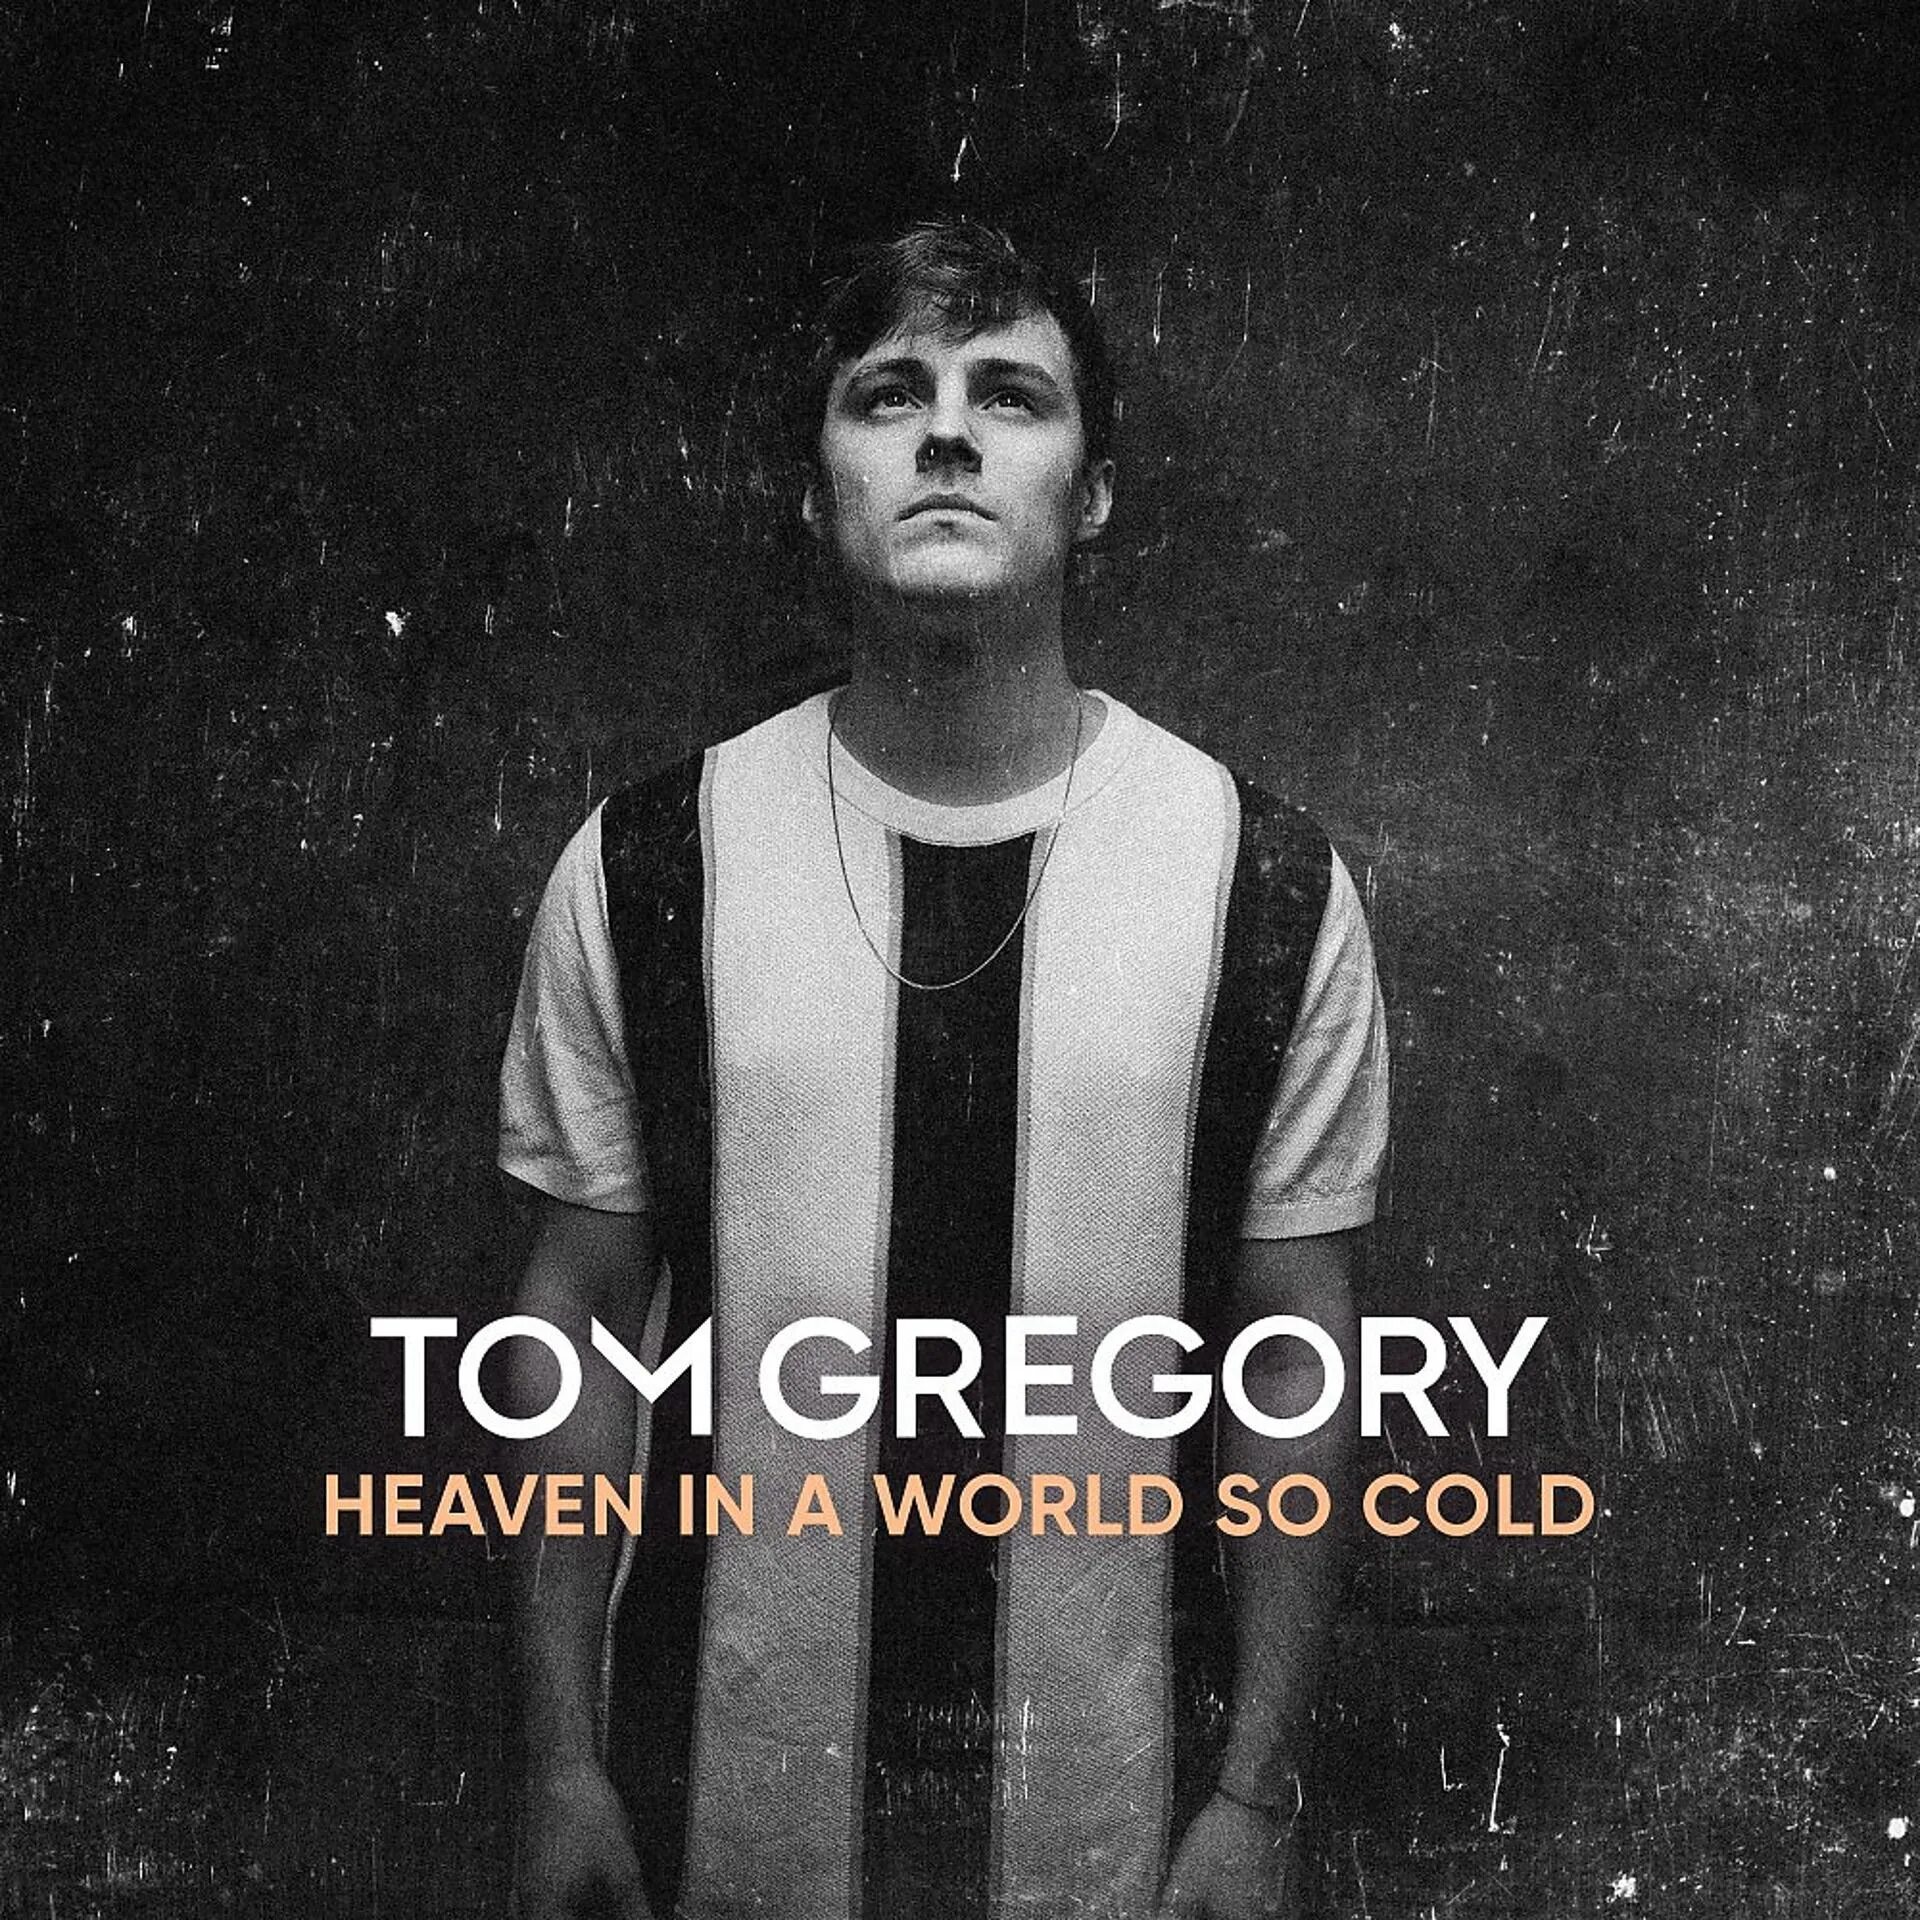 Tom gregory. Том Грегори певец. Heaven in a World so Cold Tom Gregory. Vize & Tom Gregory - never Let me down.